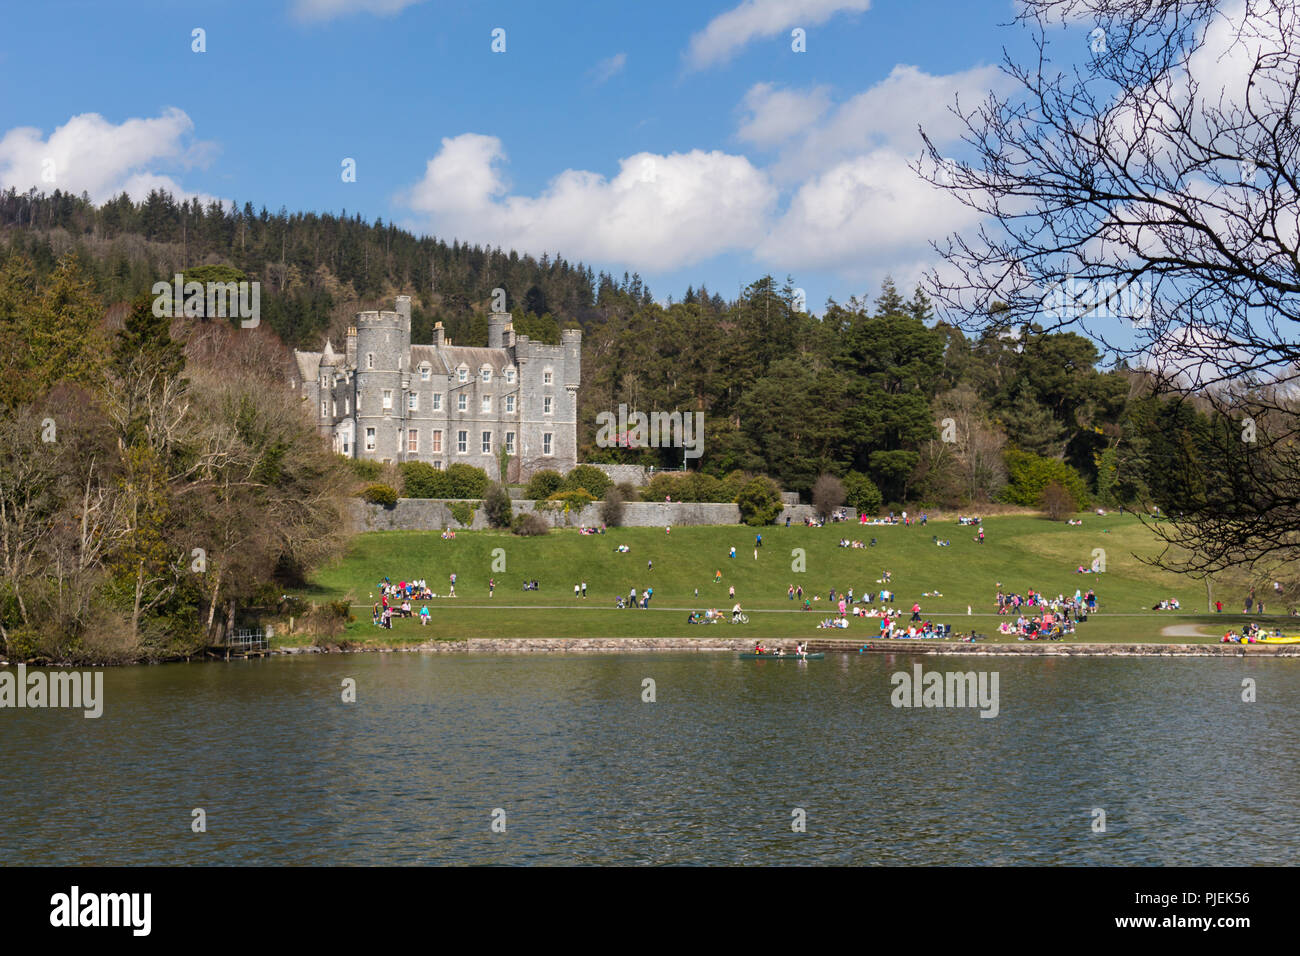 Castlewellan Castle over the busy Easter weekend at Castlewellan Forest Park, County Down, N.Ireland. Stock Photo